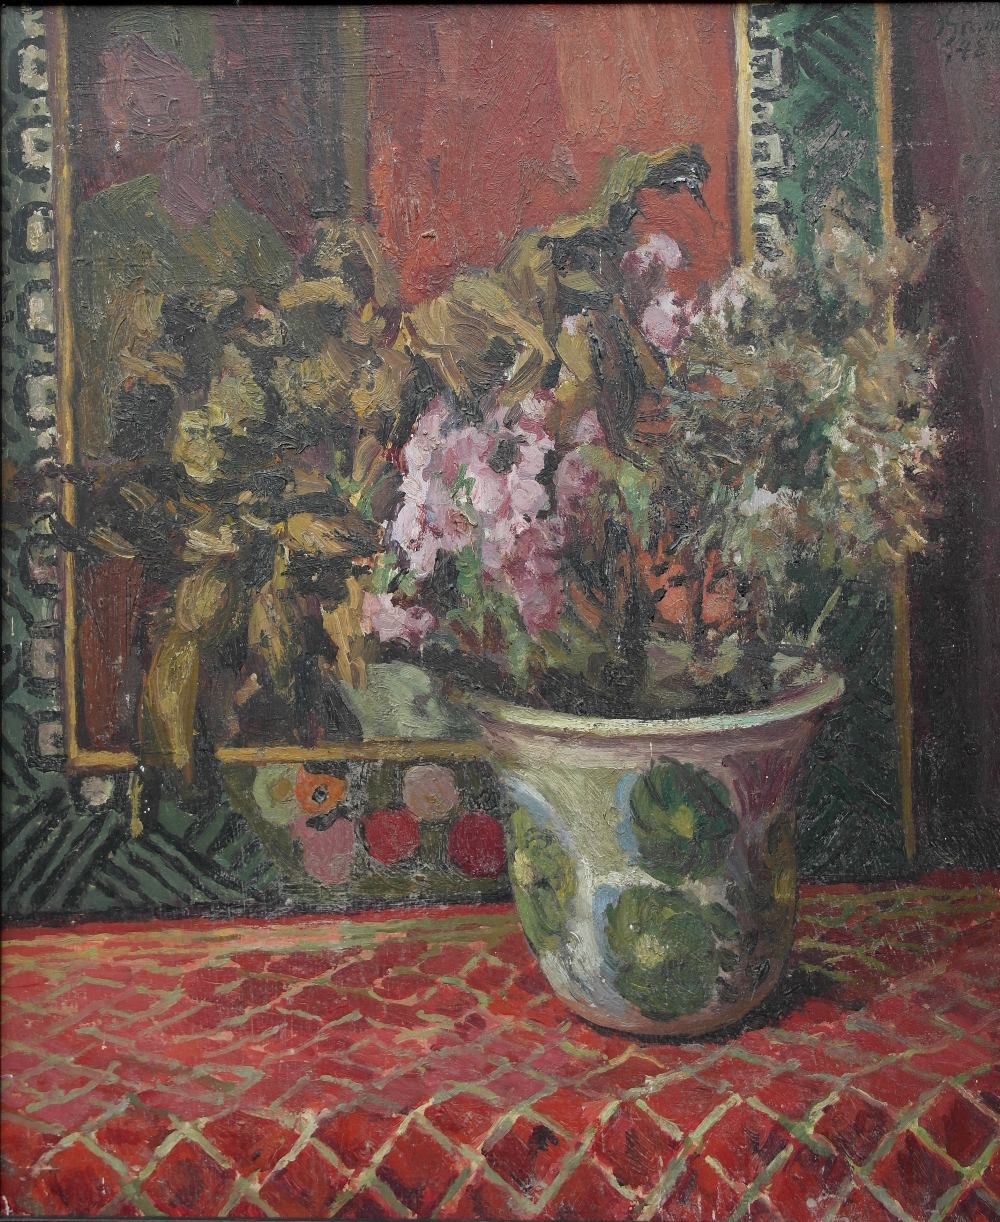 Duncan Grant (British, 1885-1978):
Floral still life, oil on panel, signed upper right & dated '